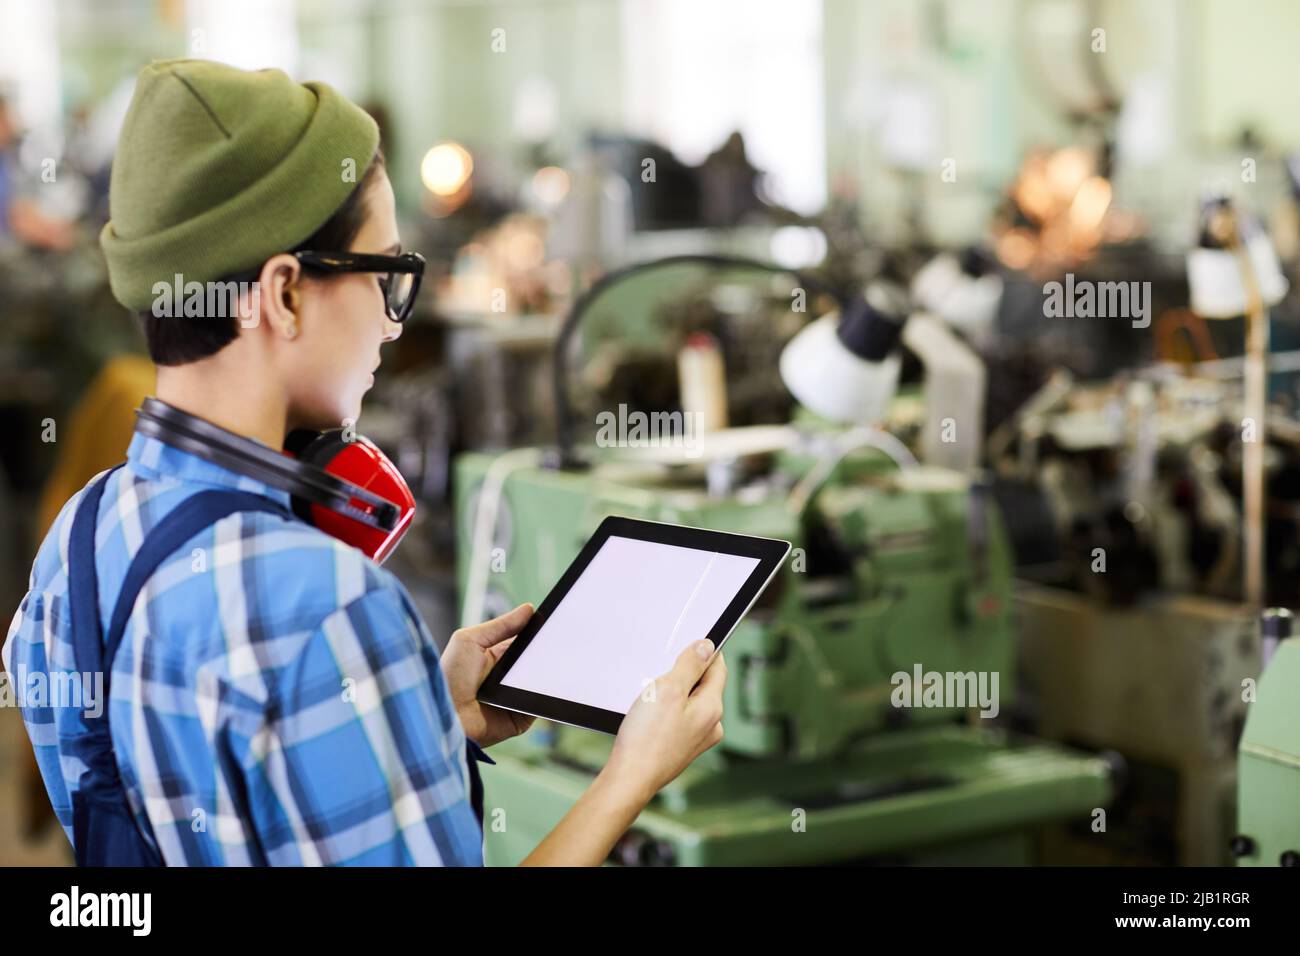 Serious quality control engineer in glasses using tablet for expertise while examining technical equipment at factory Stock Photo